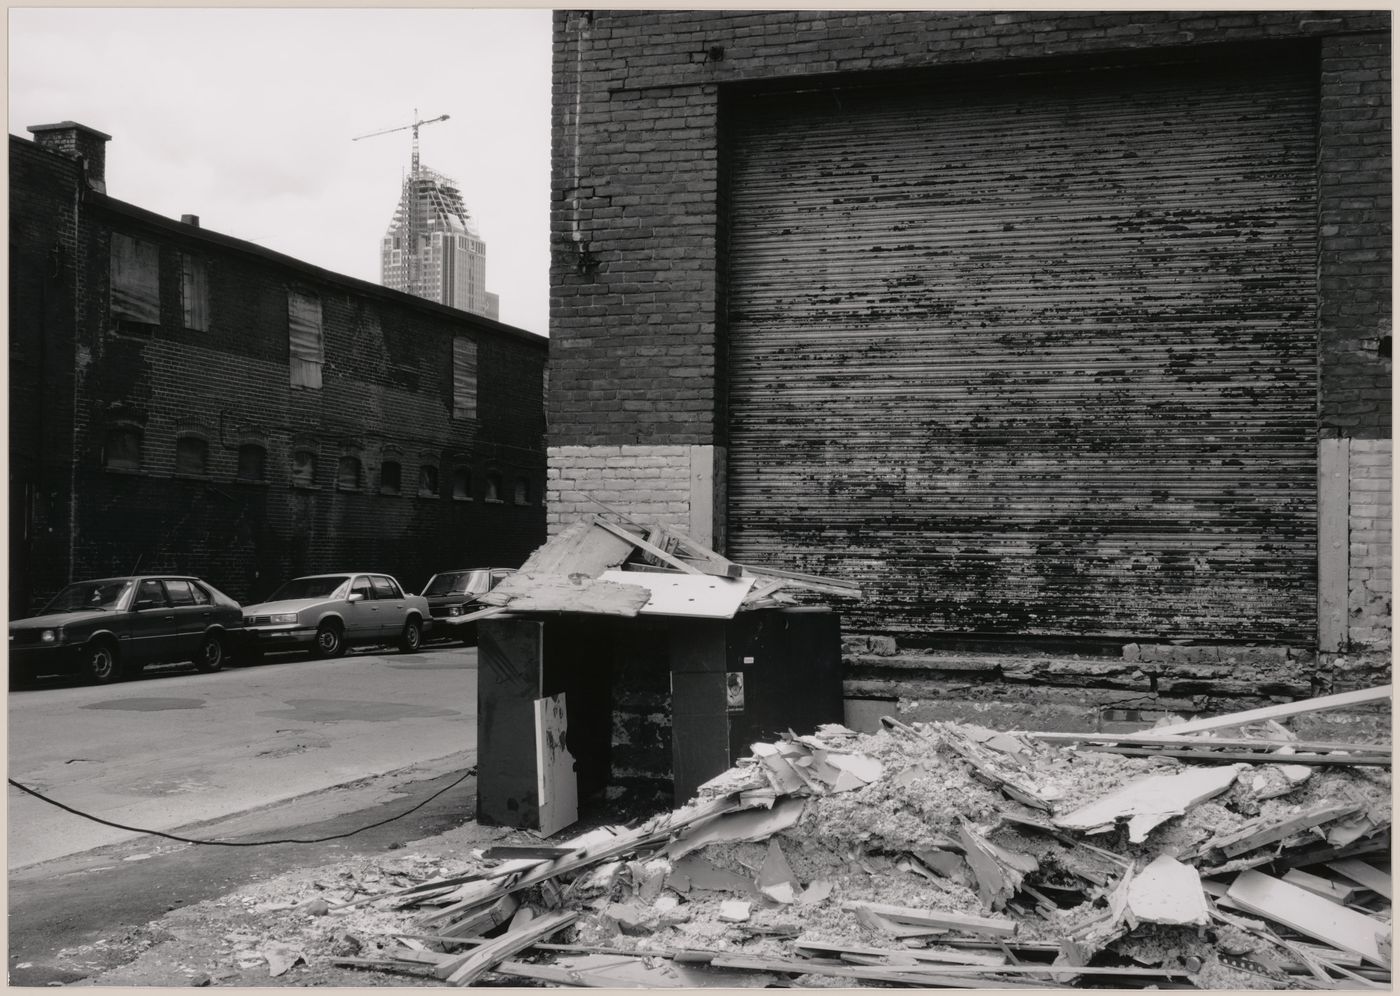 Field Work in Montreal: View of a wooden shack-like structure, a brick wall, an overhead door, buildings and parked automobiles showing Le 1000 de La Gauchetière under construction in the background, Montréal, Québec